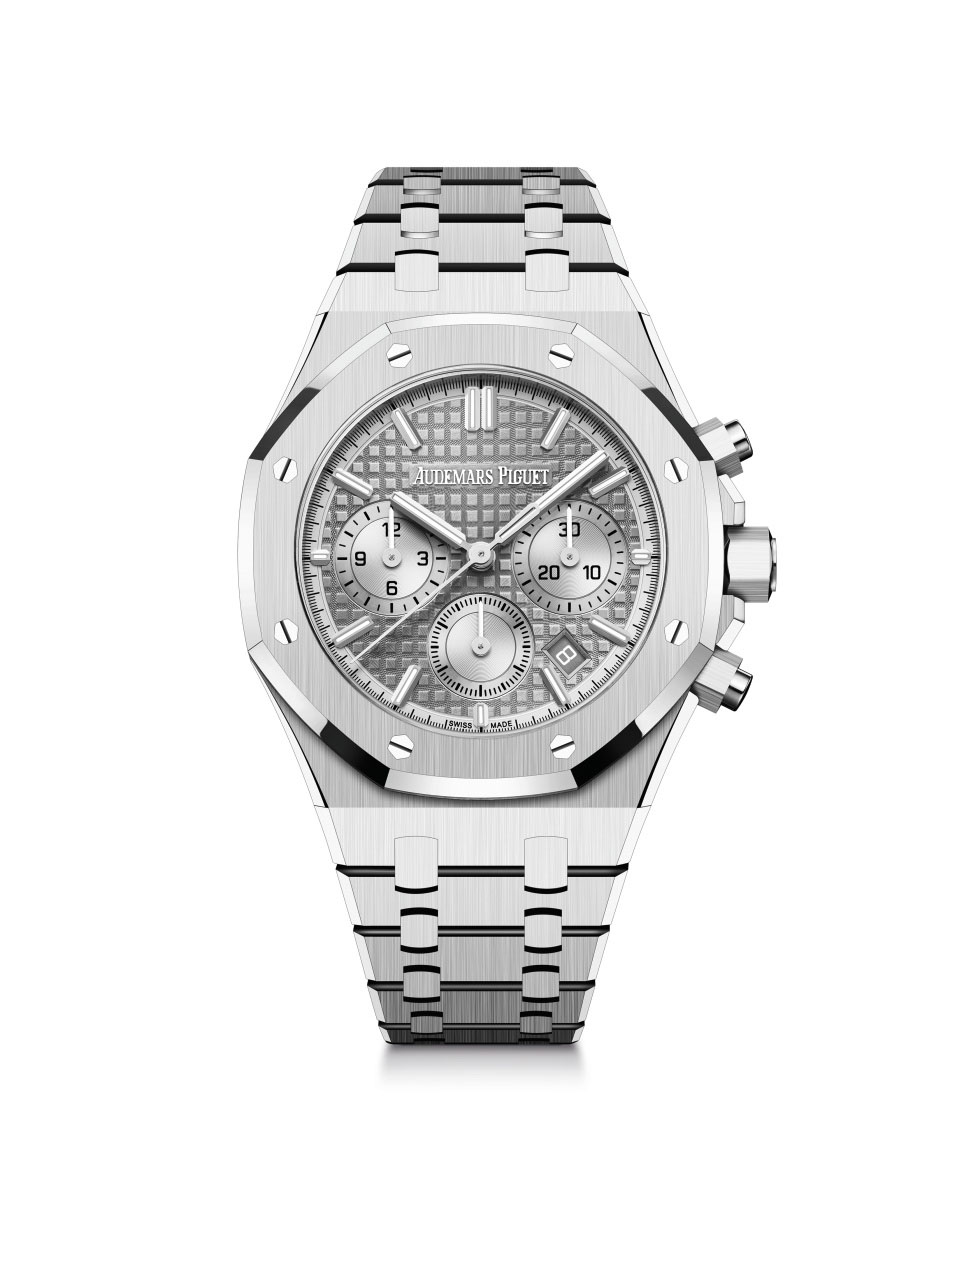 Royal Oak Selfwinding Chronograph / 38mm; stainless steel case with grey dial (26715ST.OO.1356ST.02)